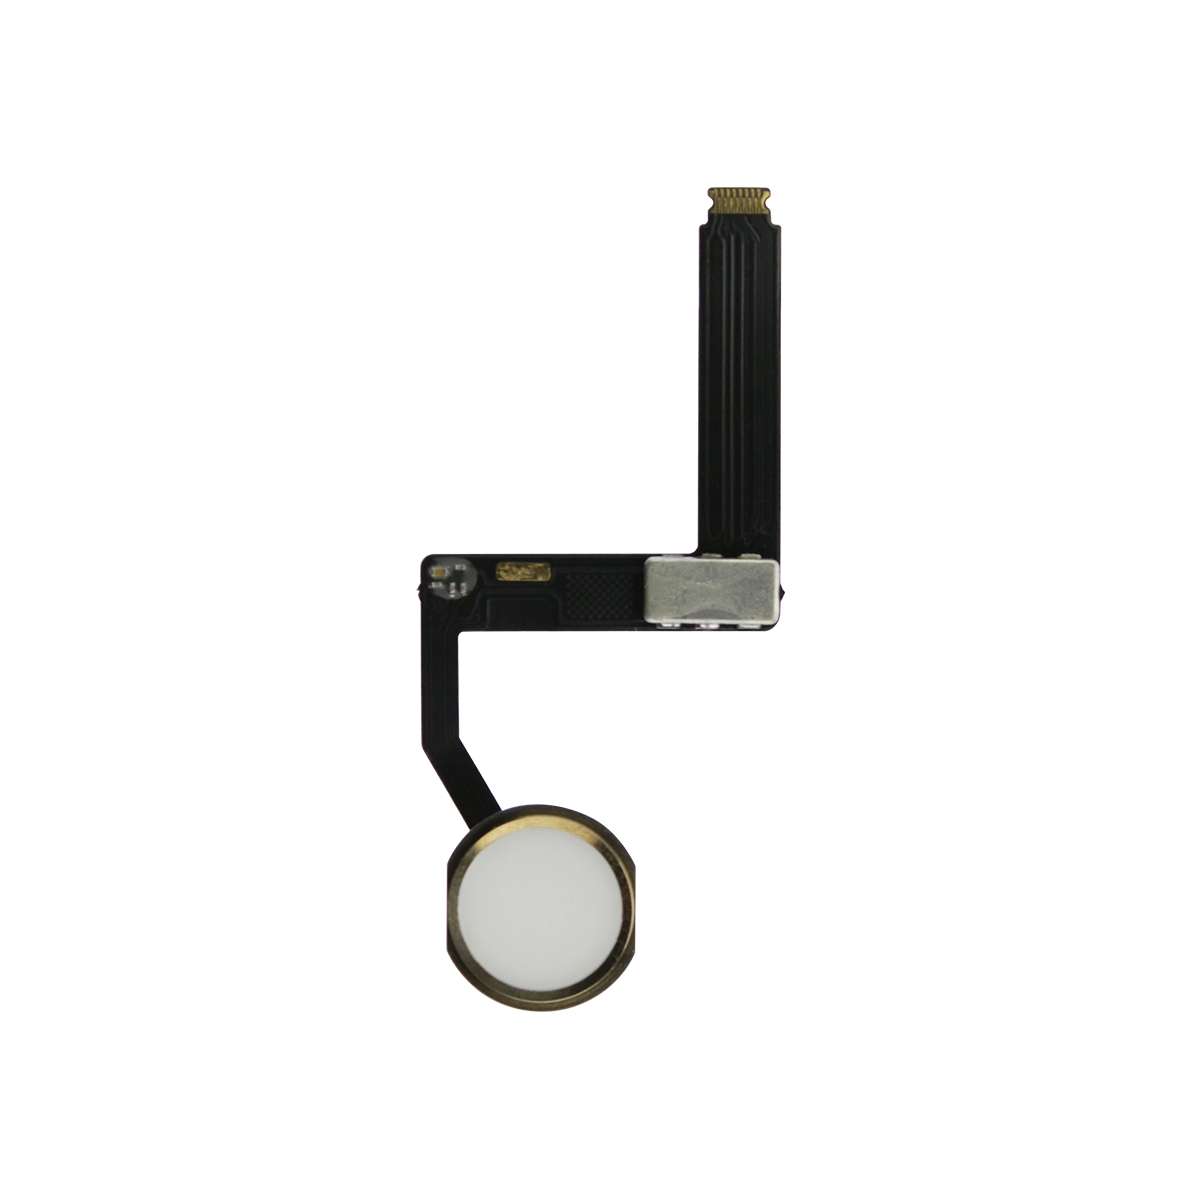 ipad-pro-9-7-inch-home-button-assembly-white-gold_S4VIAGIE2PRH.png